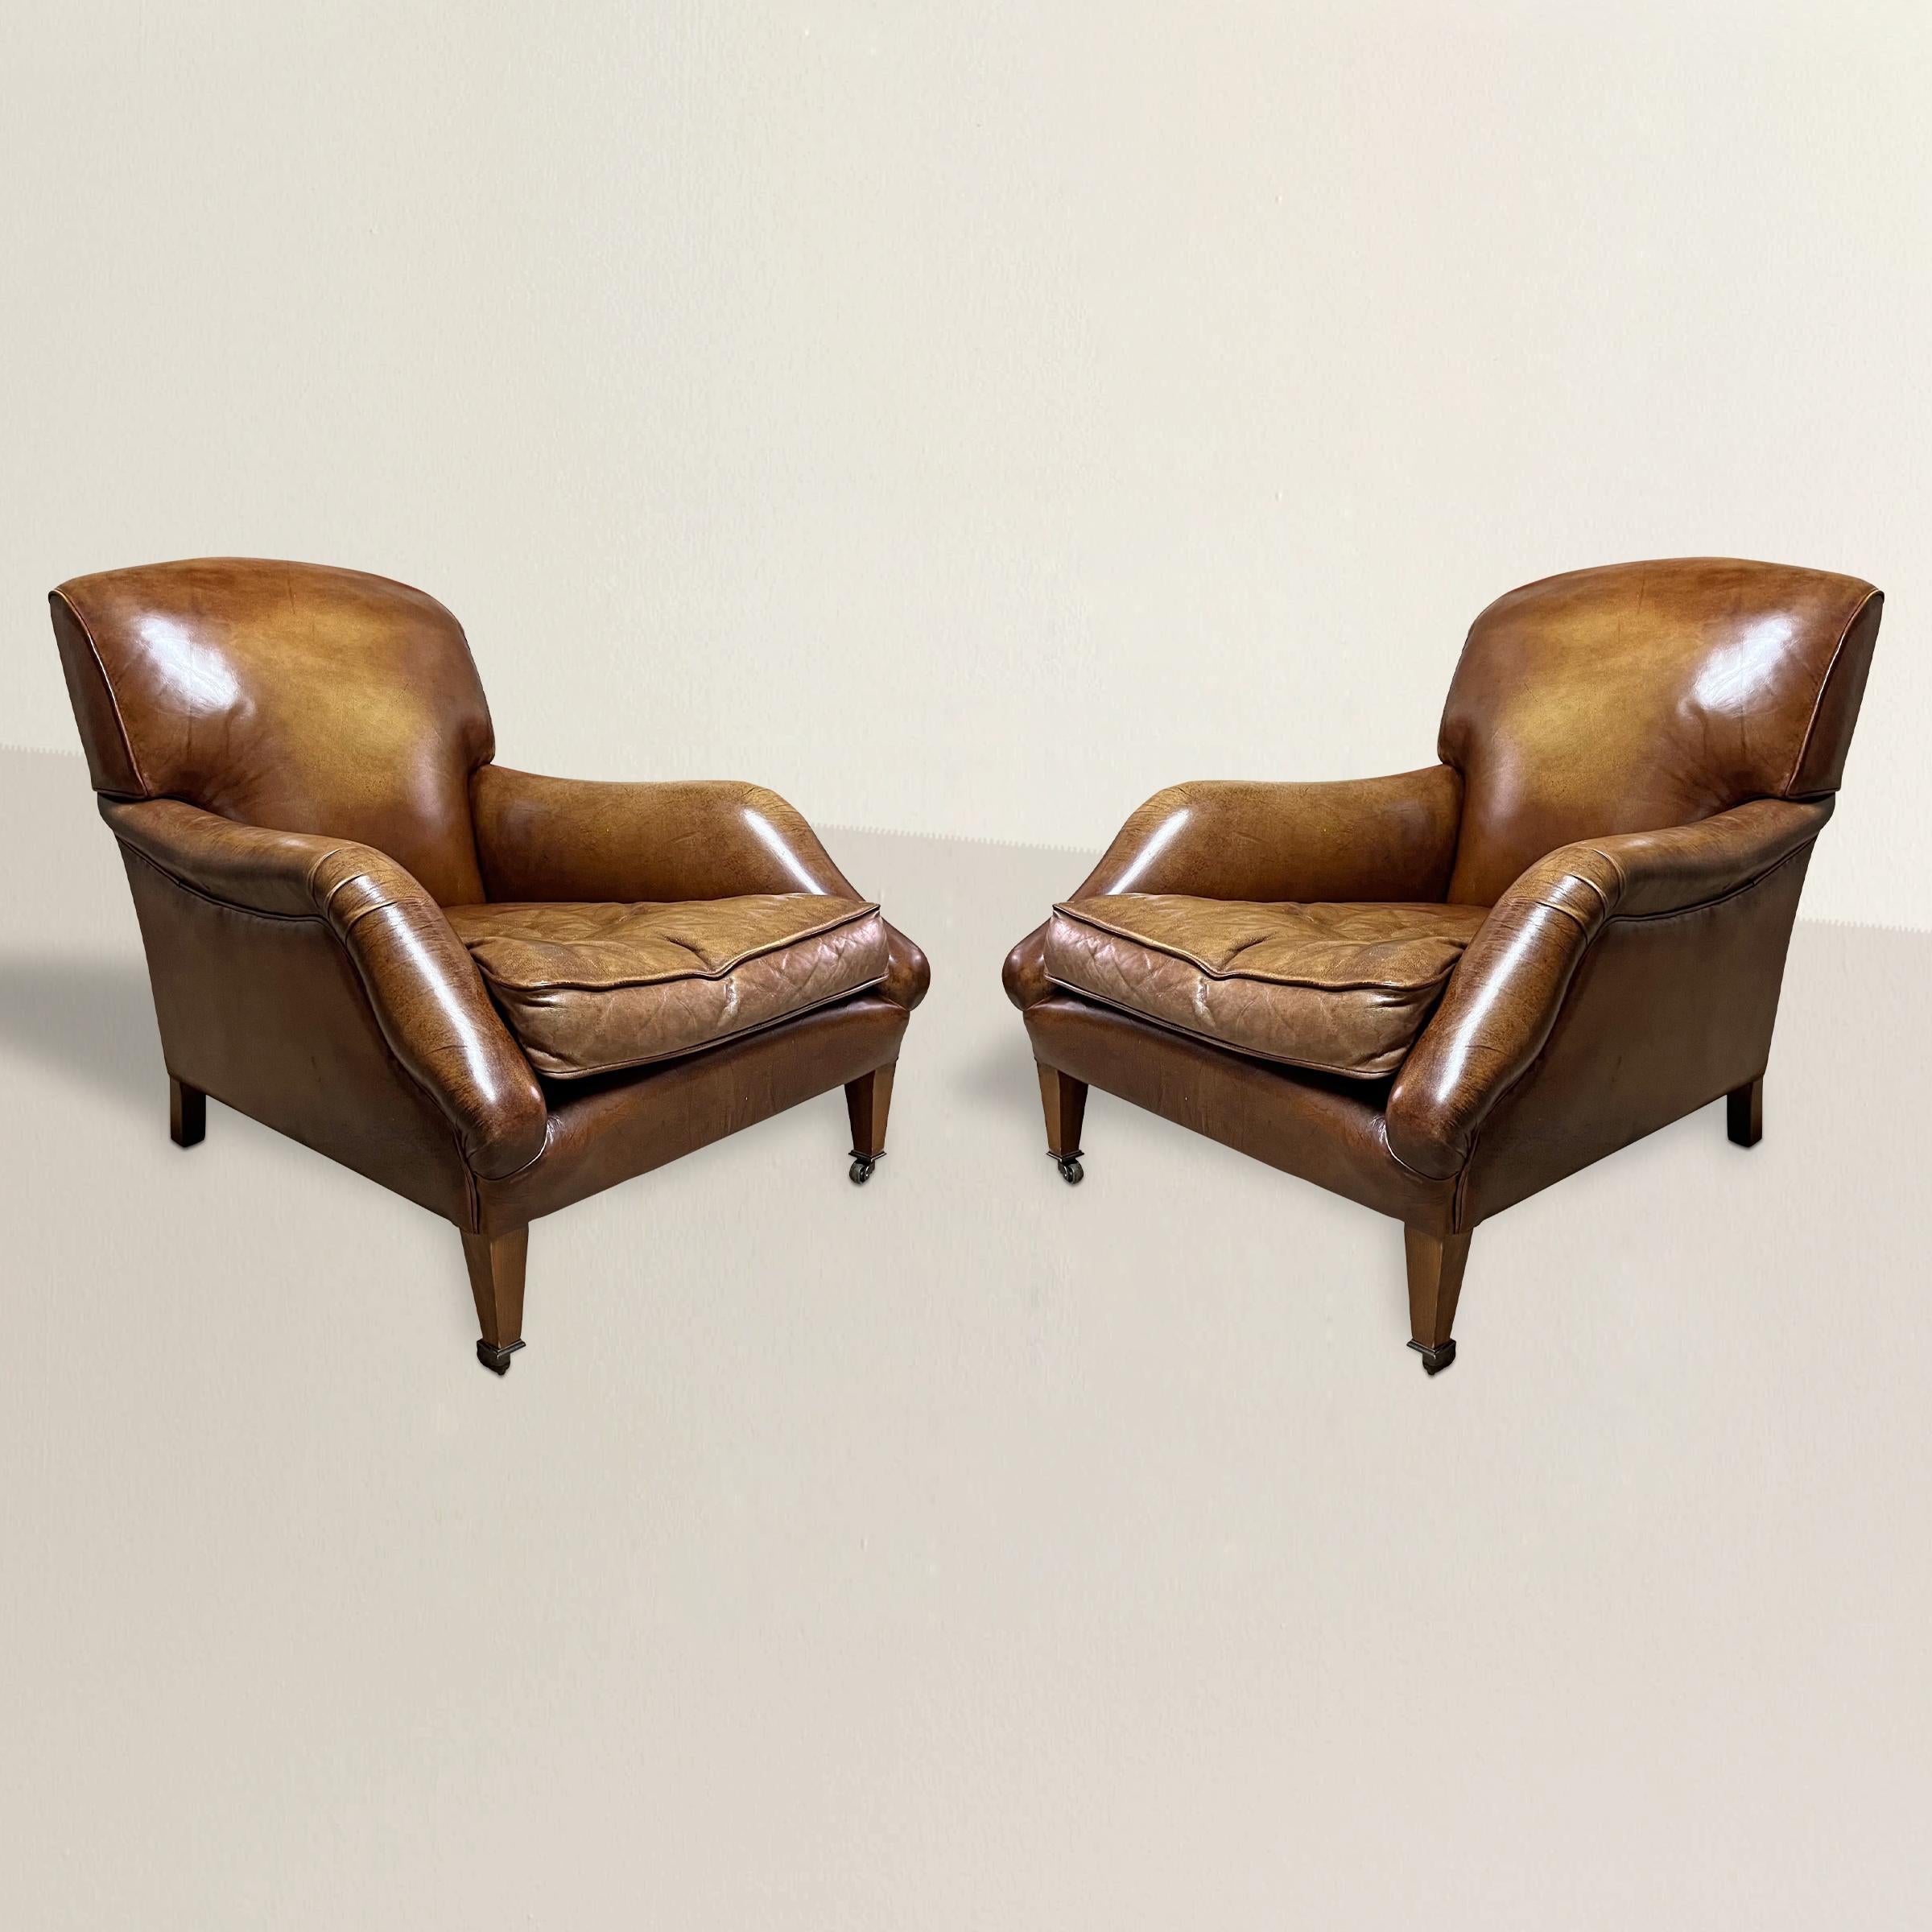 Indulge in the timeless sophistication of these exquisite 20th century leather club chairs, inspired by the English country house style synonymous with Howards & Sons. Adorned with gracefully rolled arms and supported by square tapered legs